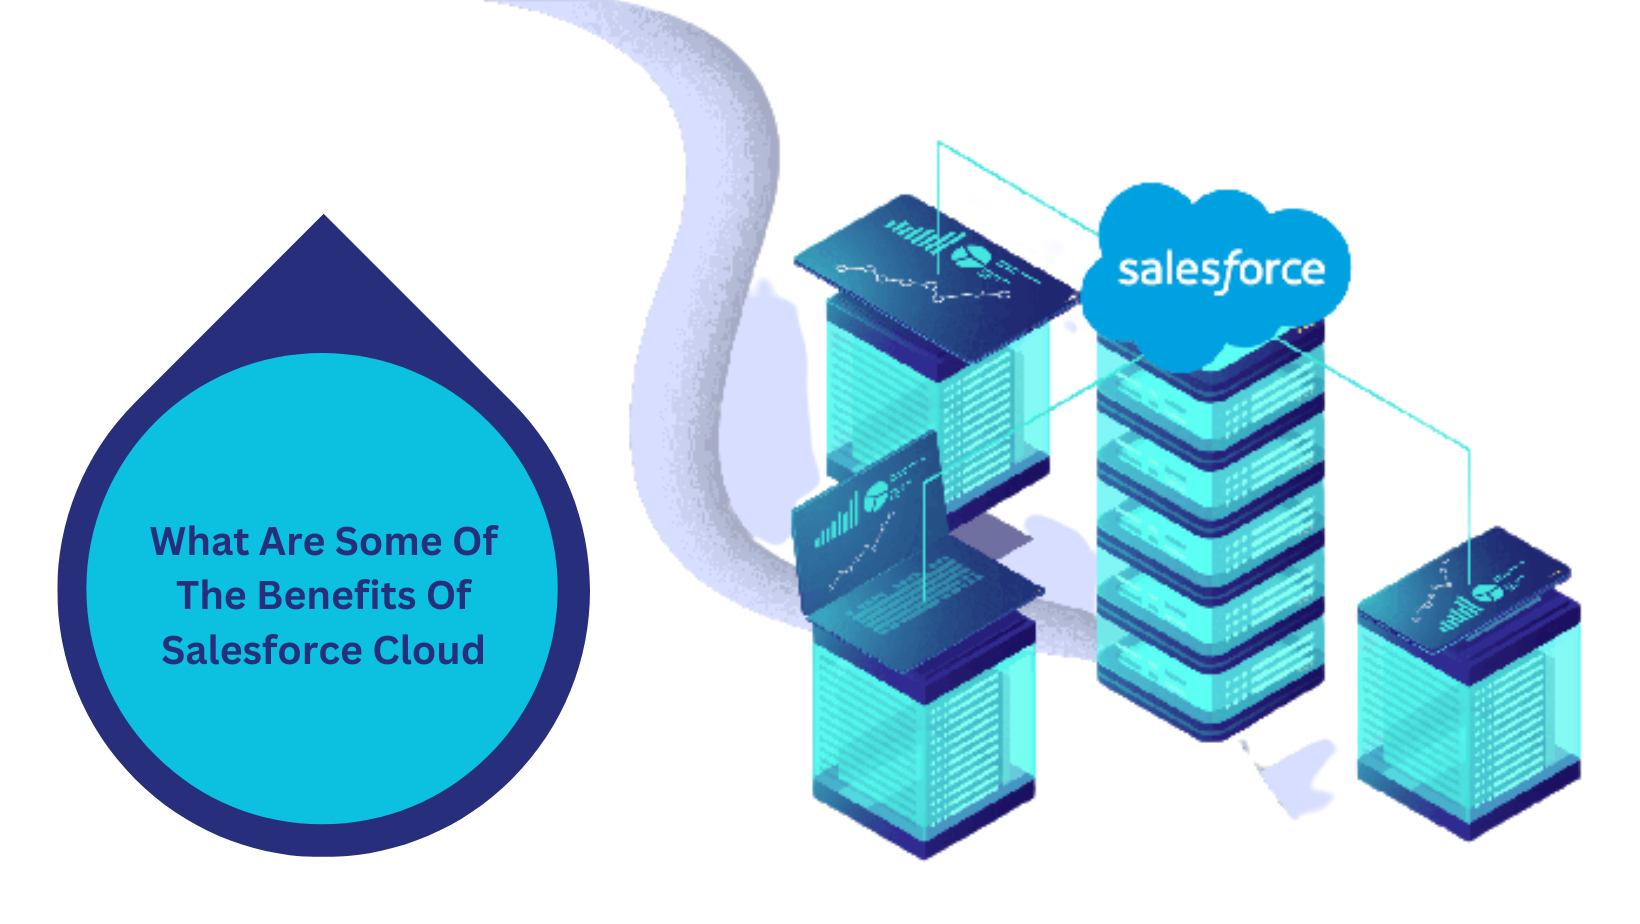 What Are Some Of The Benefits Of Salesforce Cloud